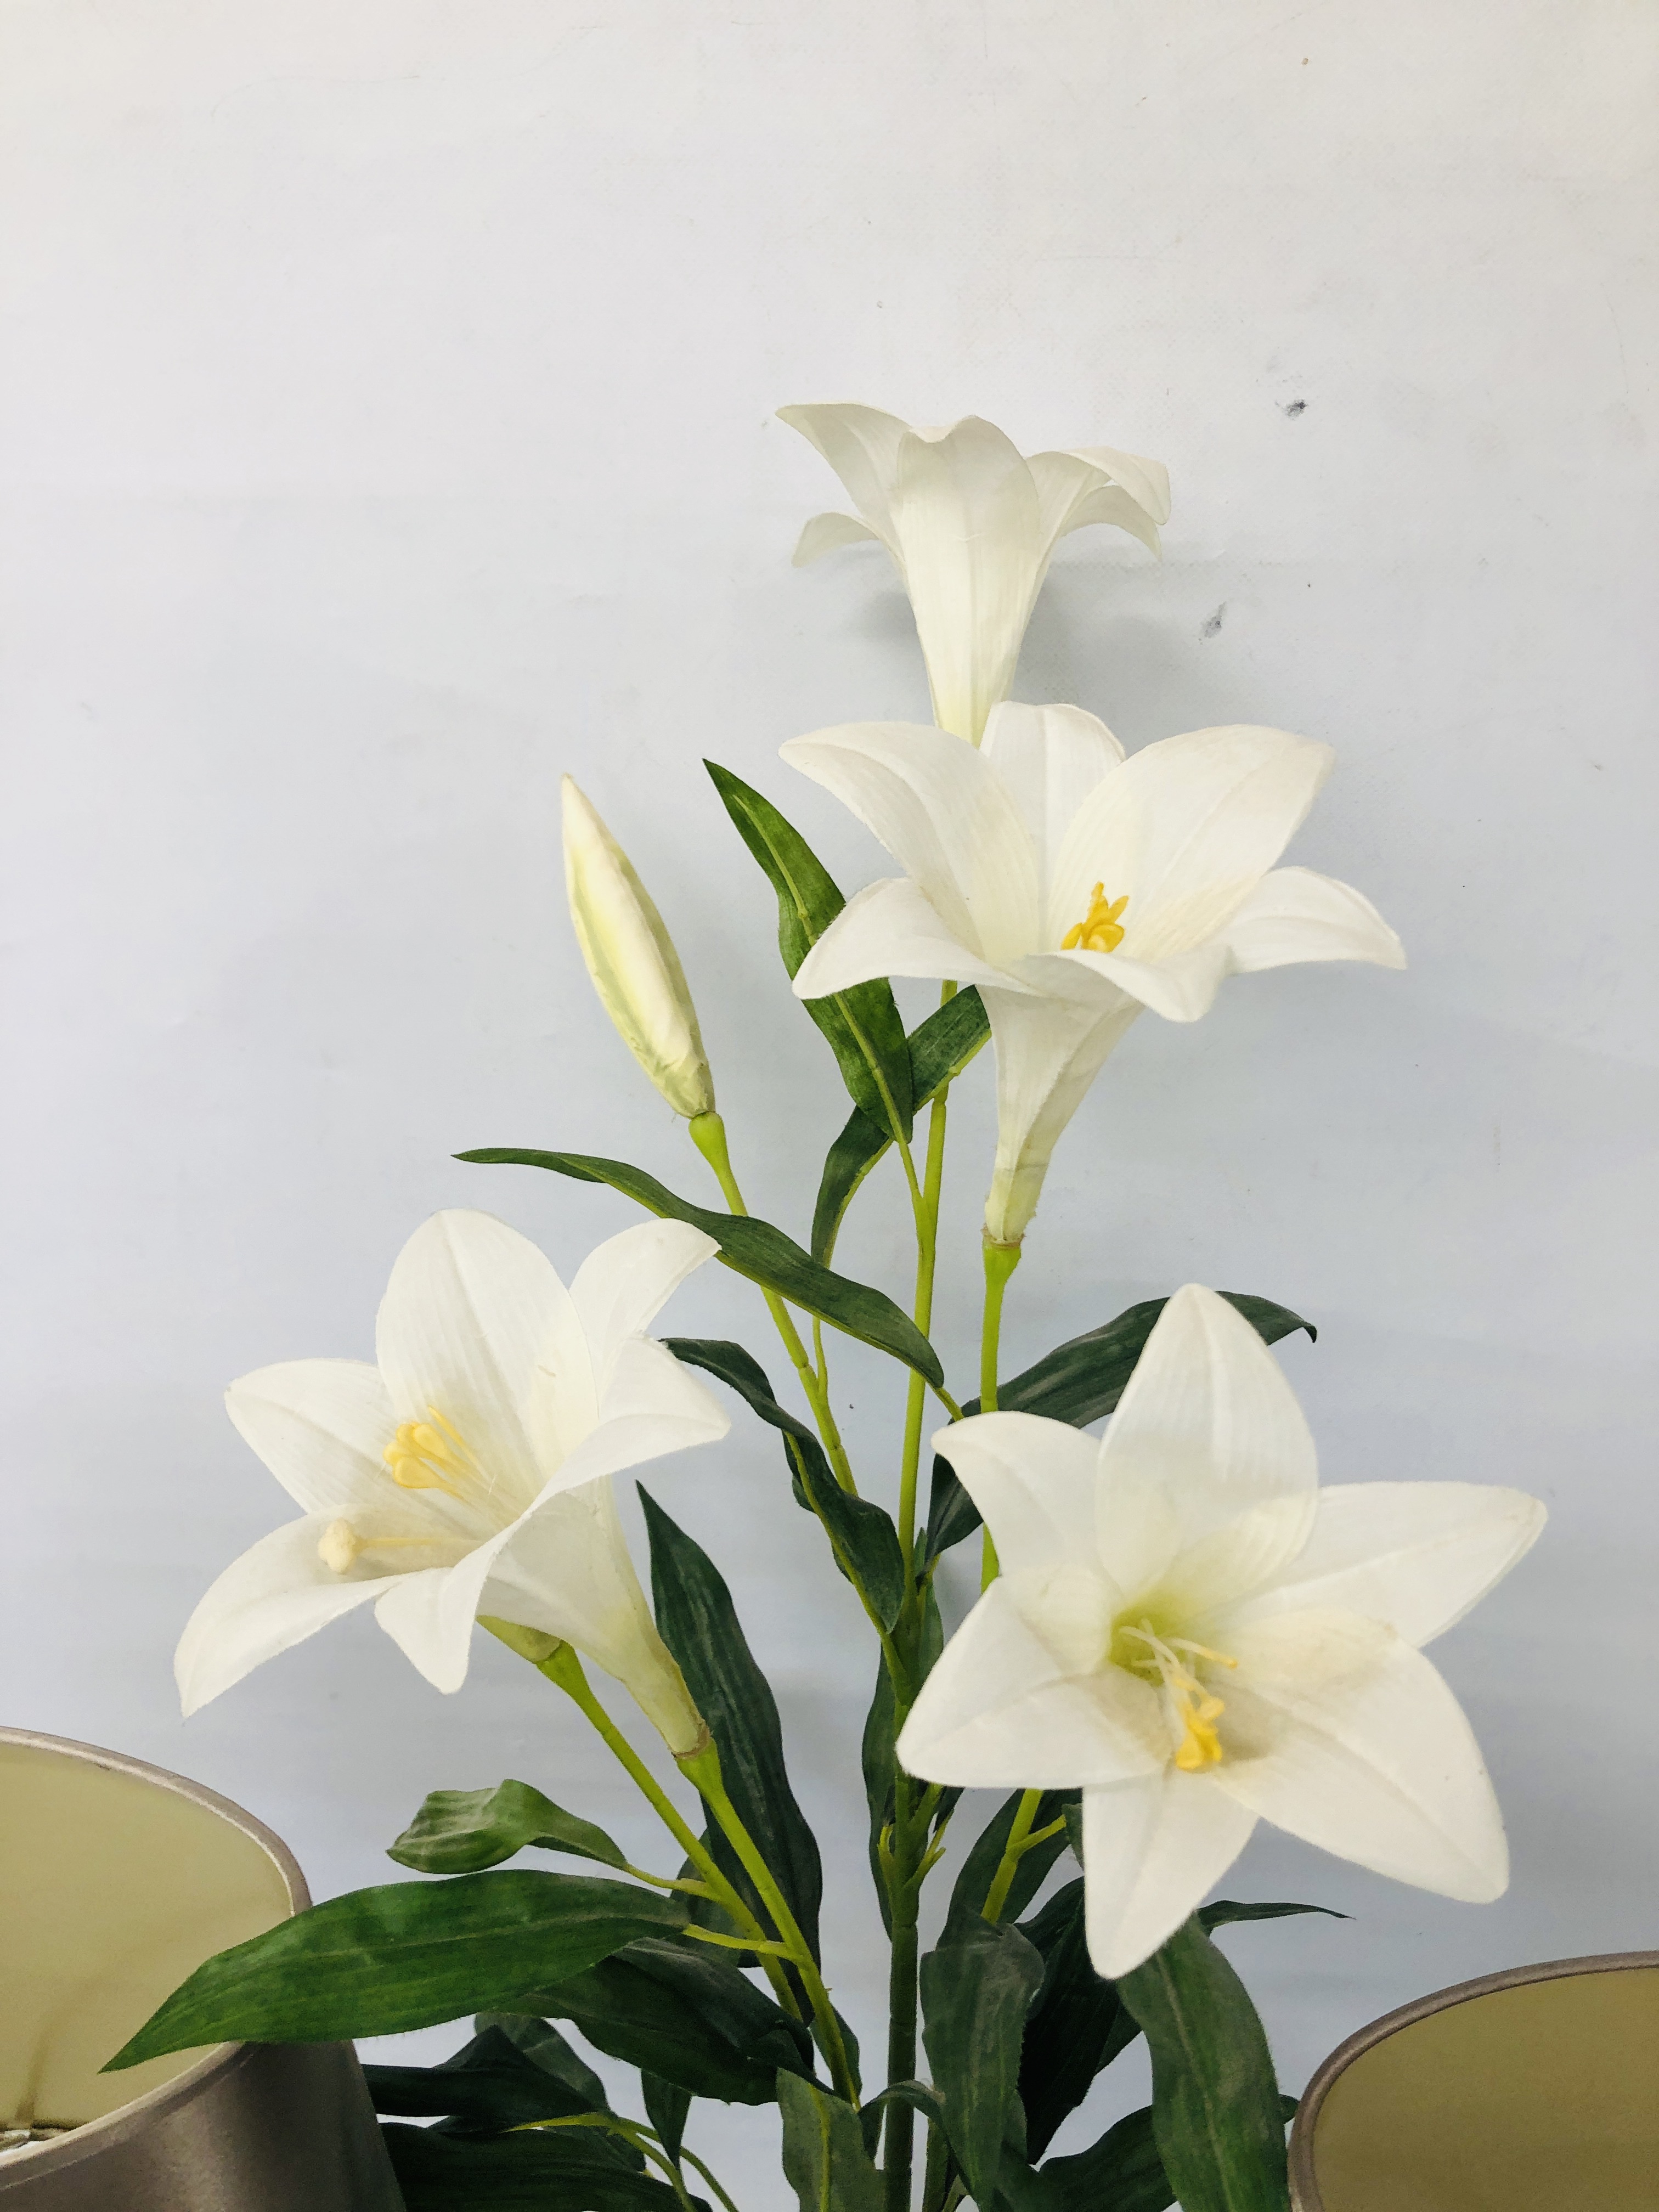 PAIR OF MODERN LAURA ASHLEY TABLE LAMPS AND SHADES ALONG WITH AN ARTIFICIAL LILY ARRANGEMENT - SOLD - Image 3 of 4